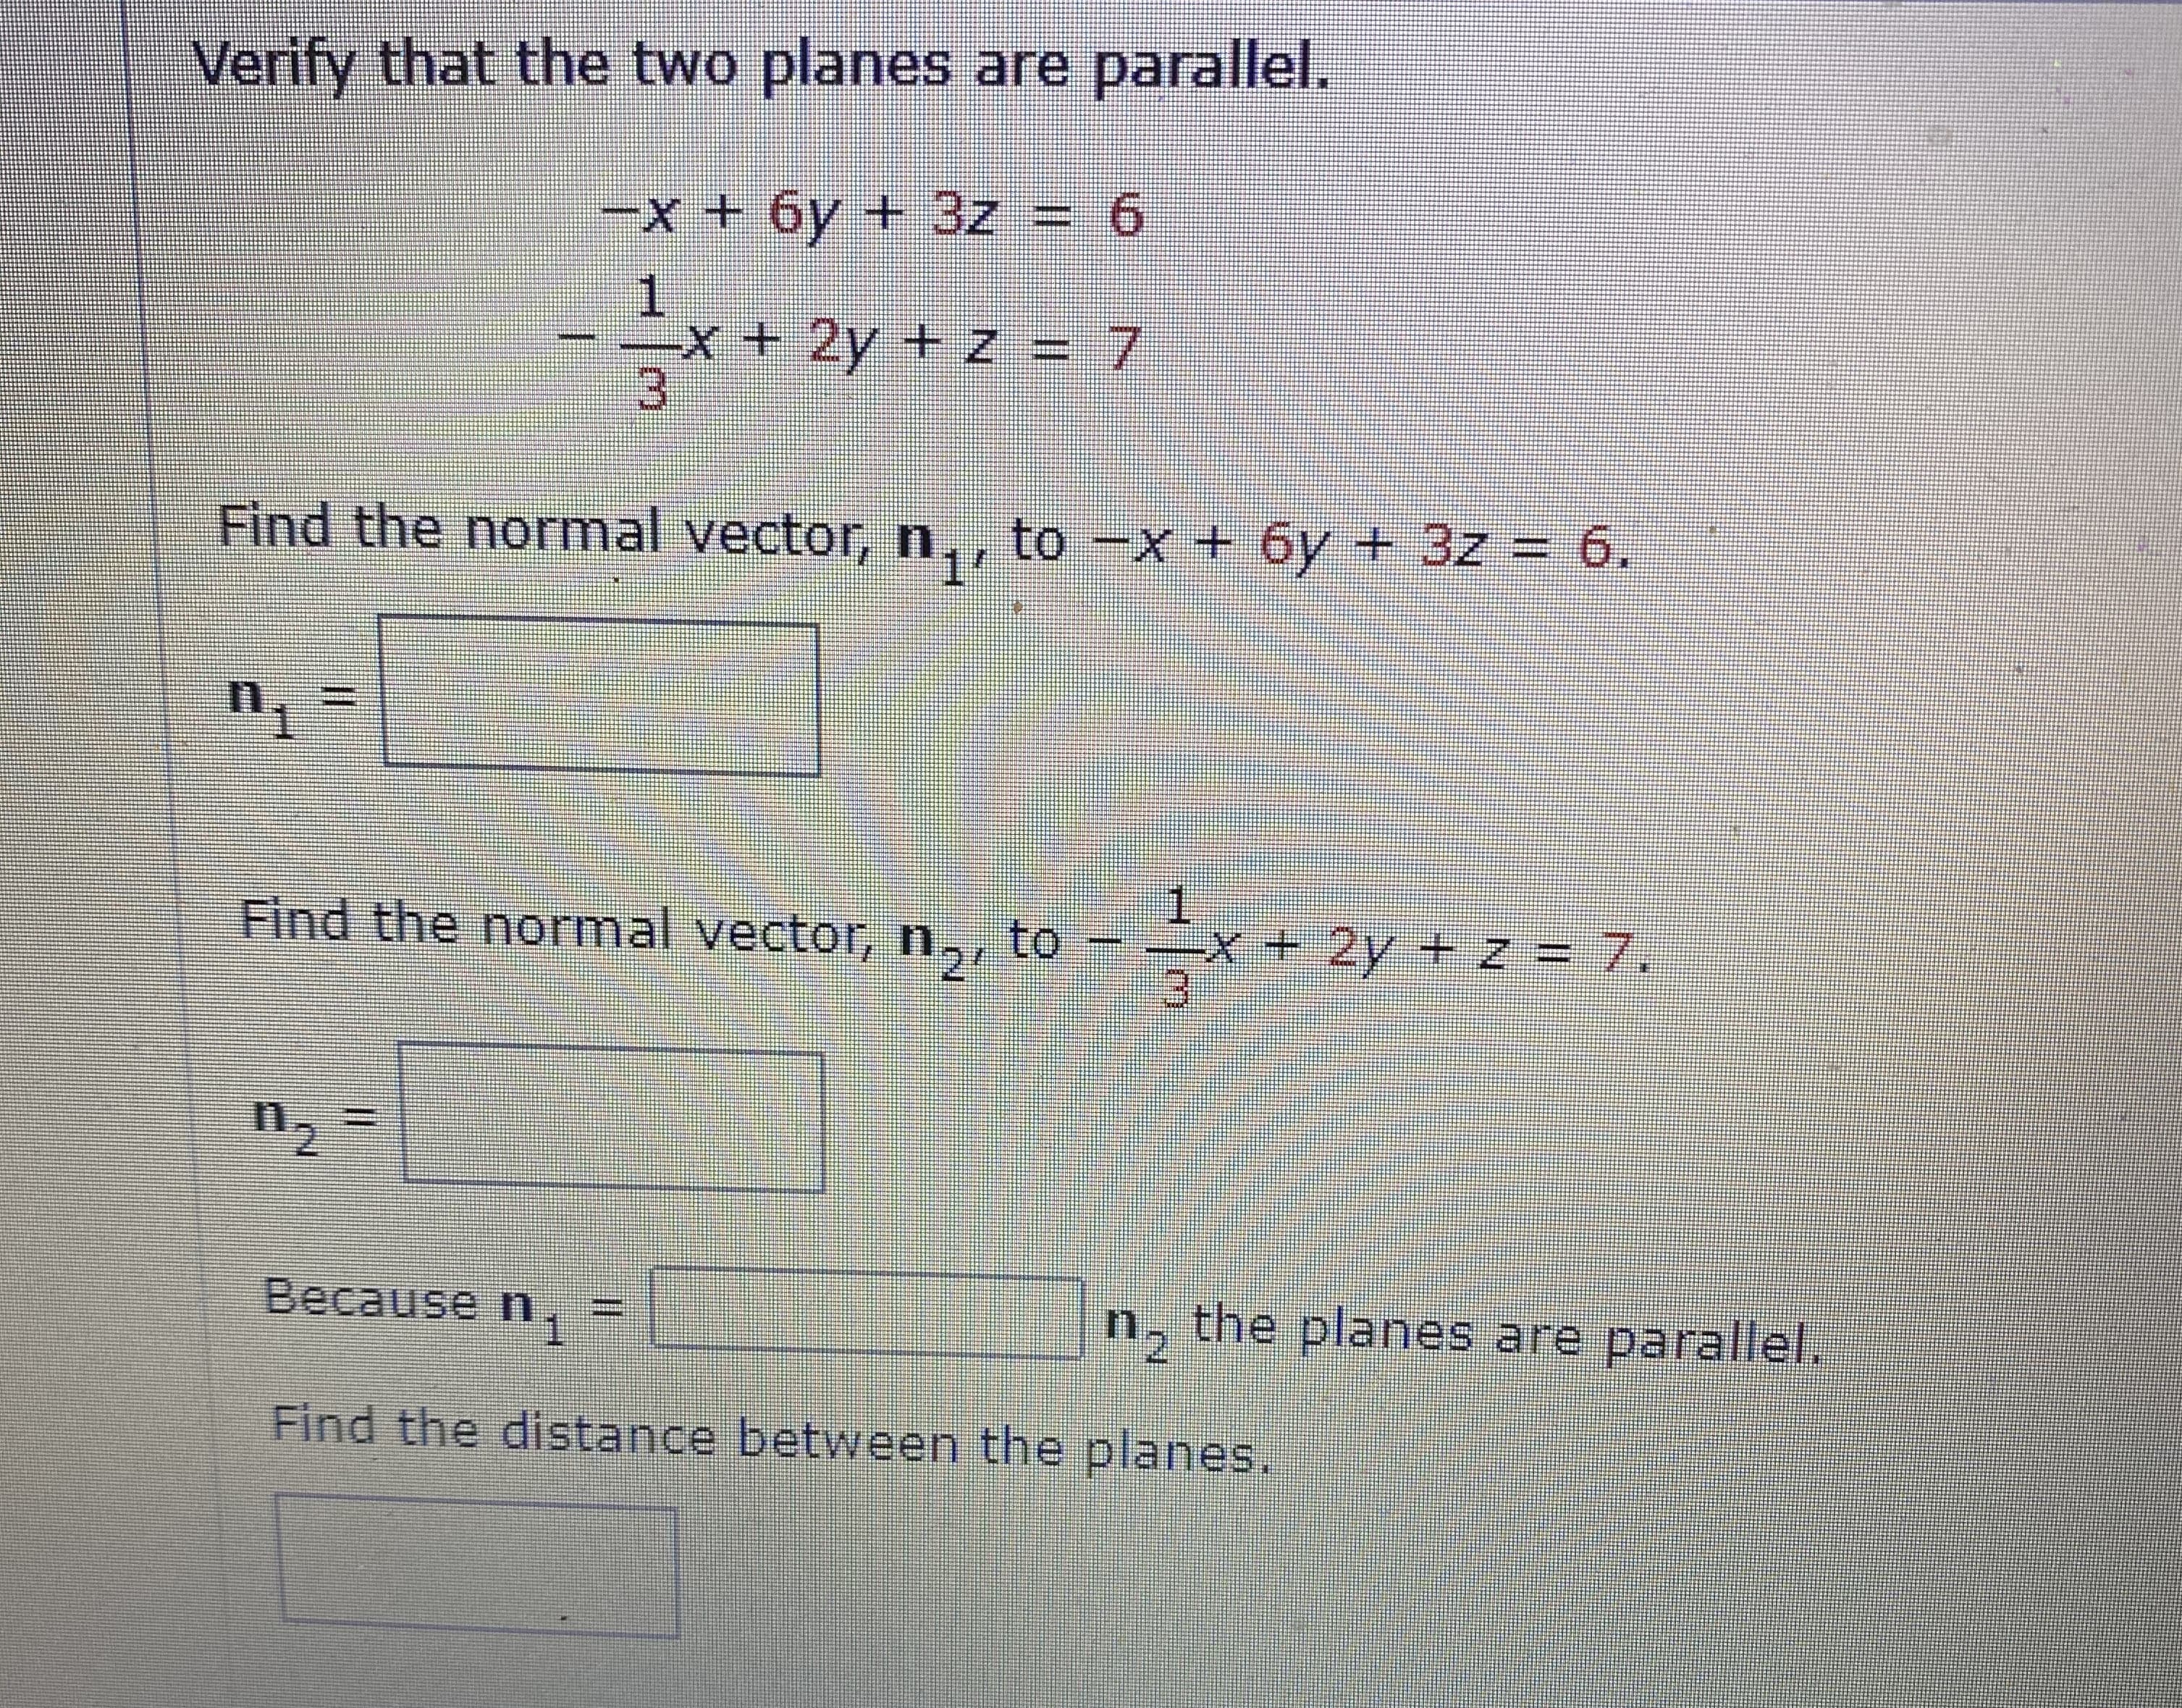 Verify that the two planes are parallel.
